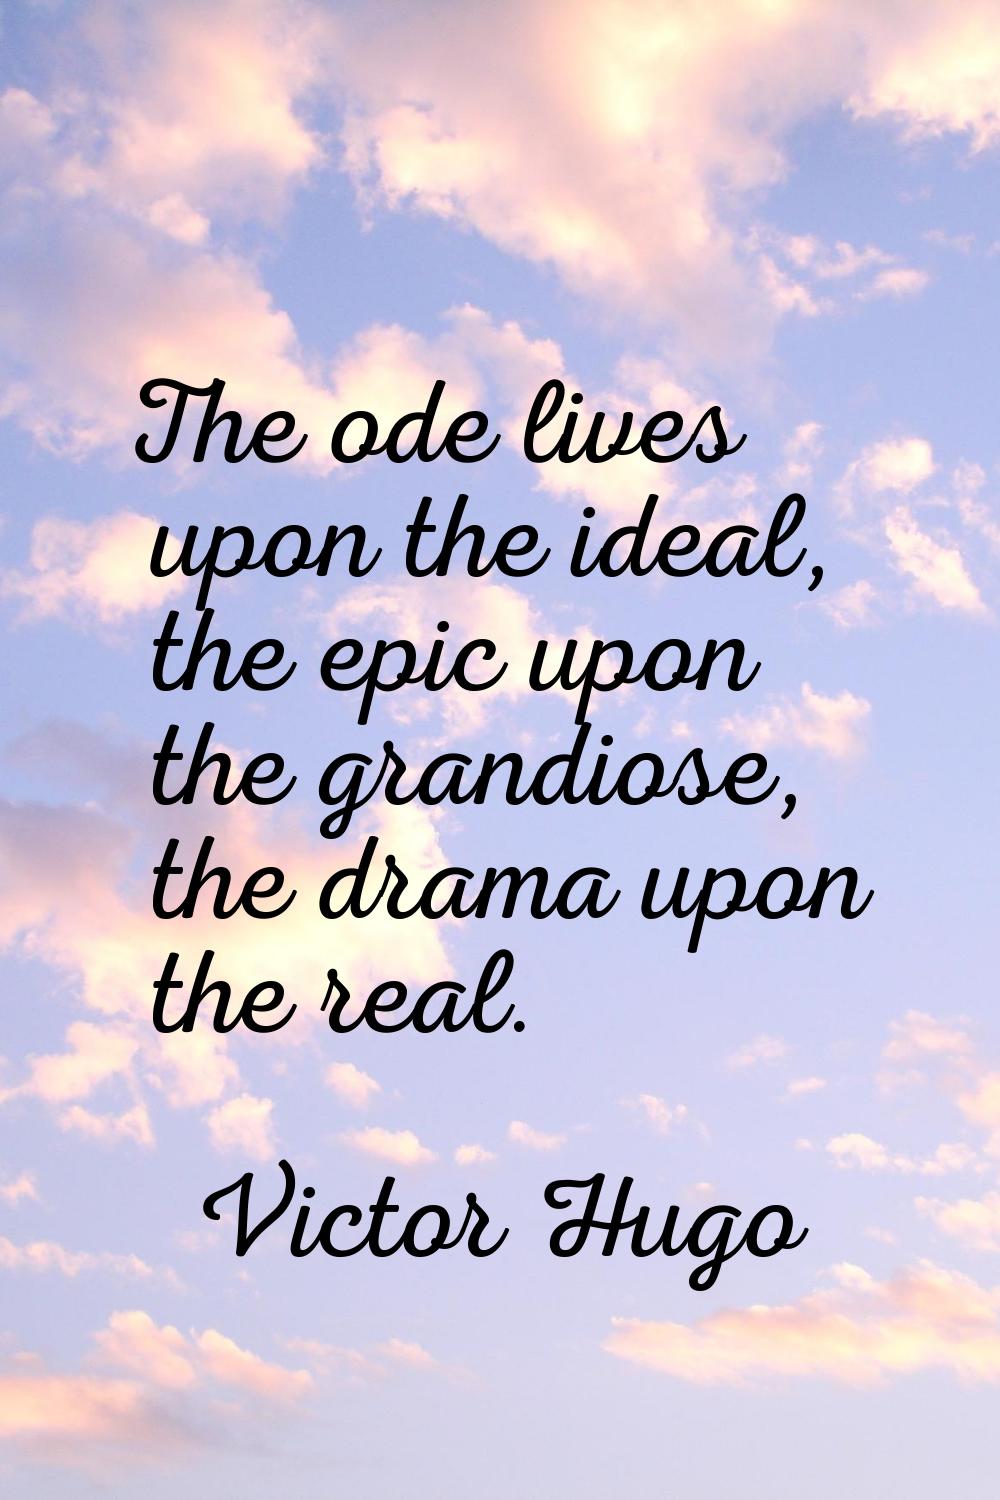 The ode lives upon the ideal, the epic upon the grandiose, the drama upon the real.